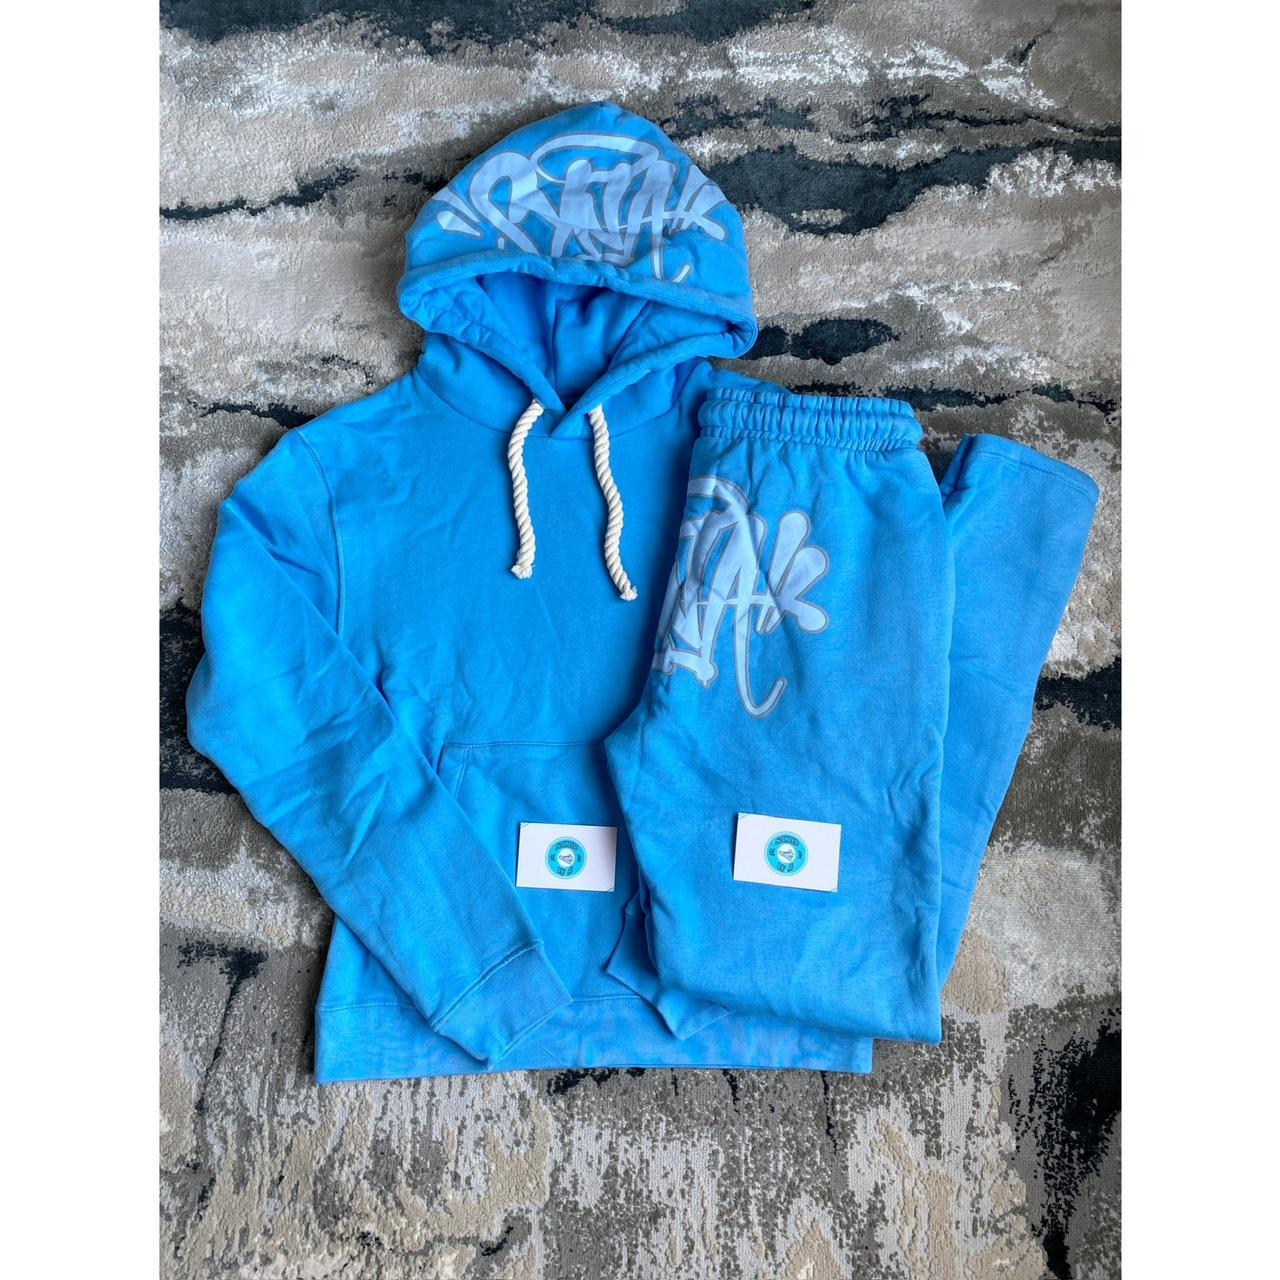 Central Cee - Syna World Logo Tracksuit - Blue - Medium🔵 SOLD OUT